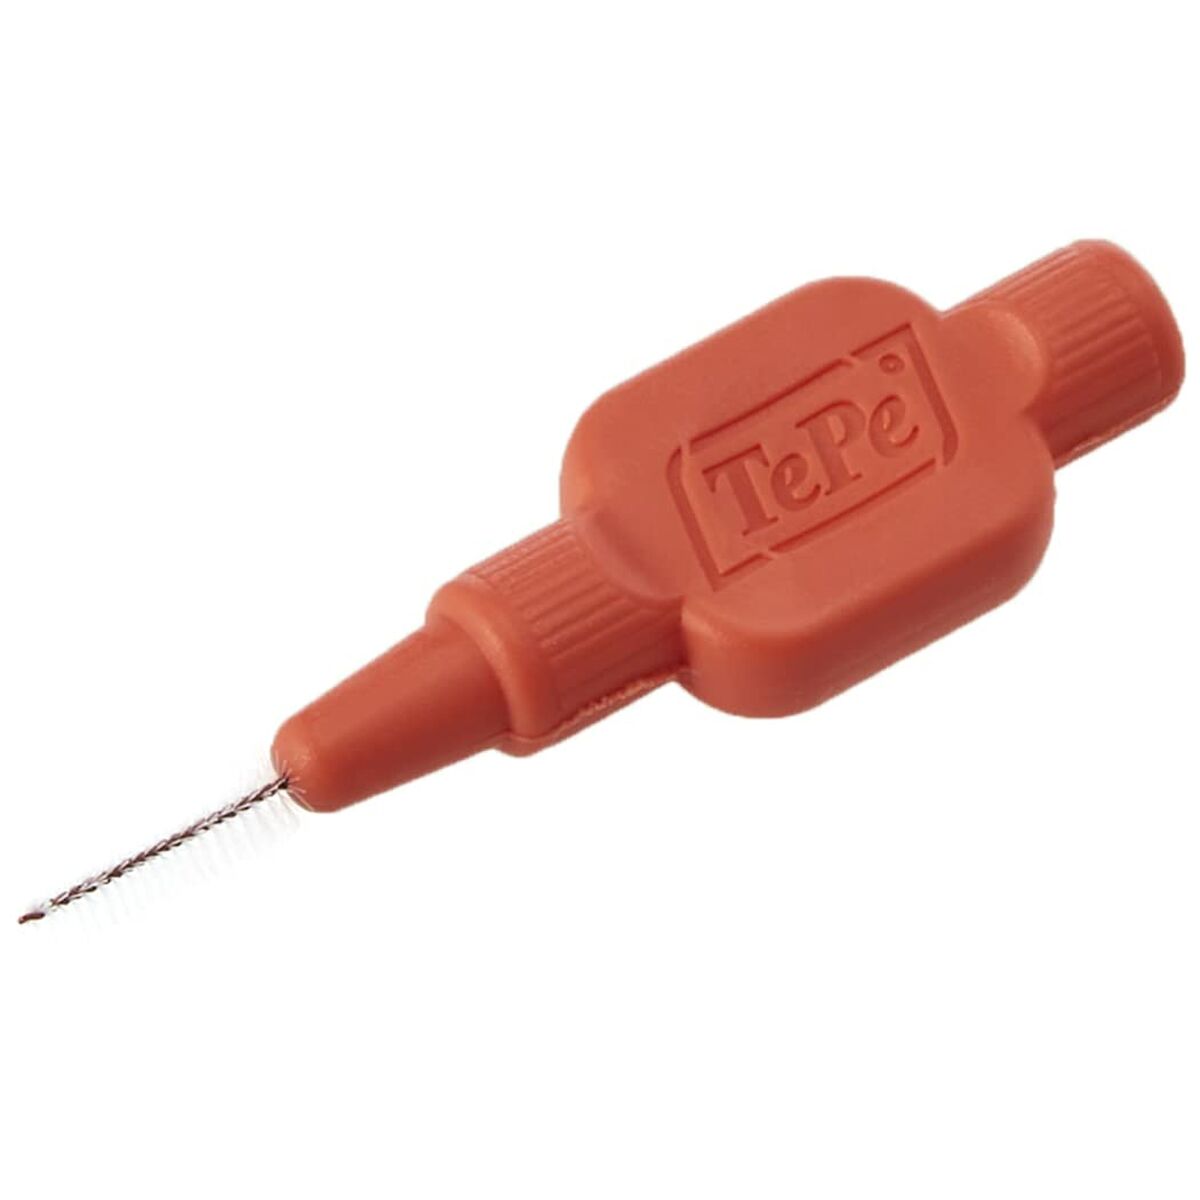 Interdental brushes Tepe Extra Soft Red 0,5 mm 25 Units